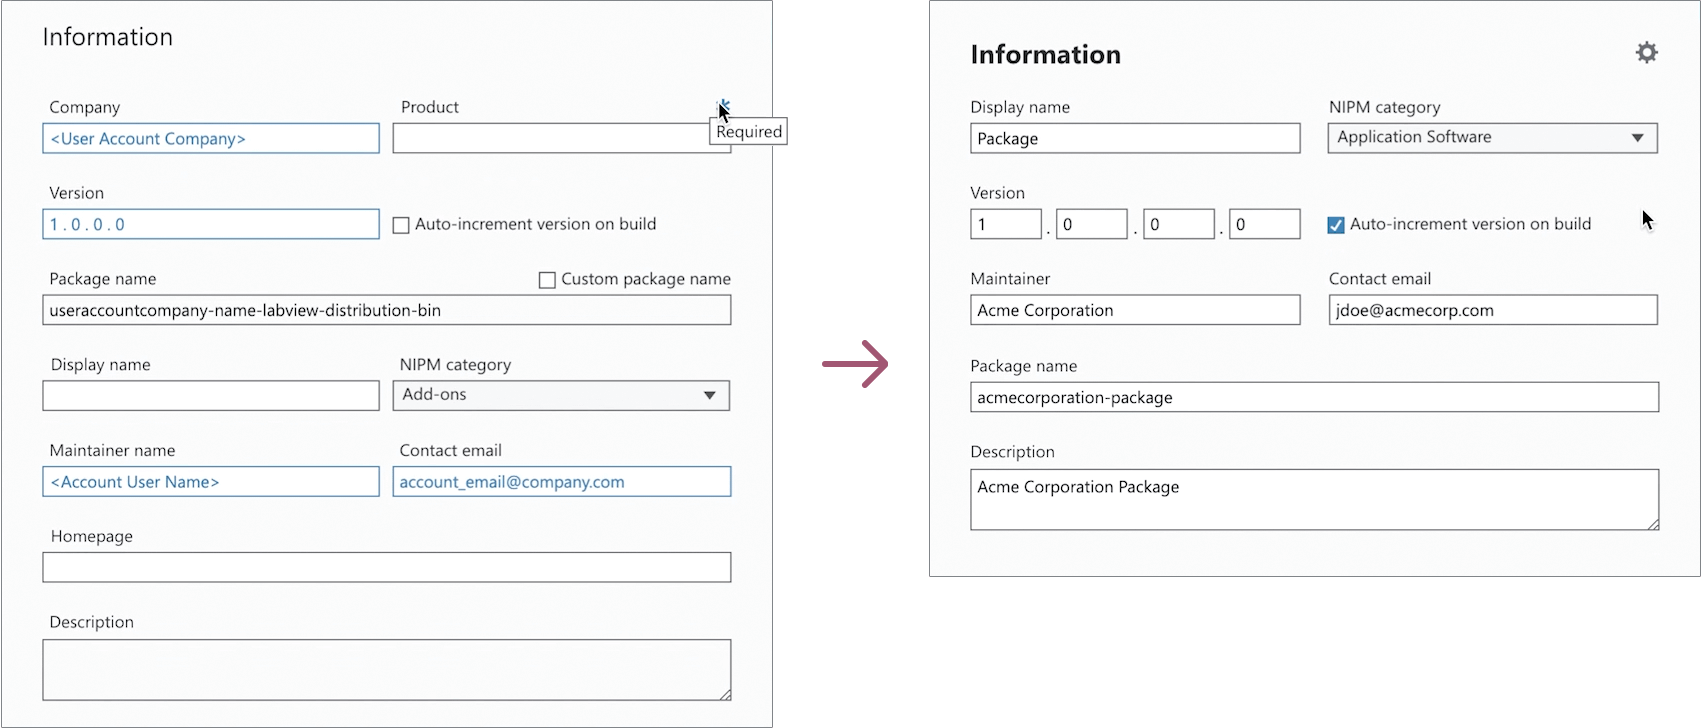 a before and after of a section of a wireframe for the information section, with the before having a field marked as required, and the after having 3 fewer form fields and no required indicators on fields